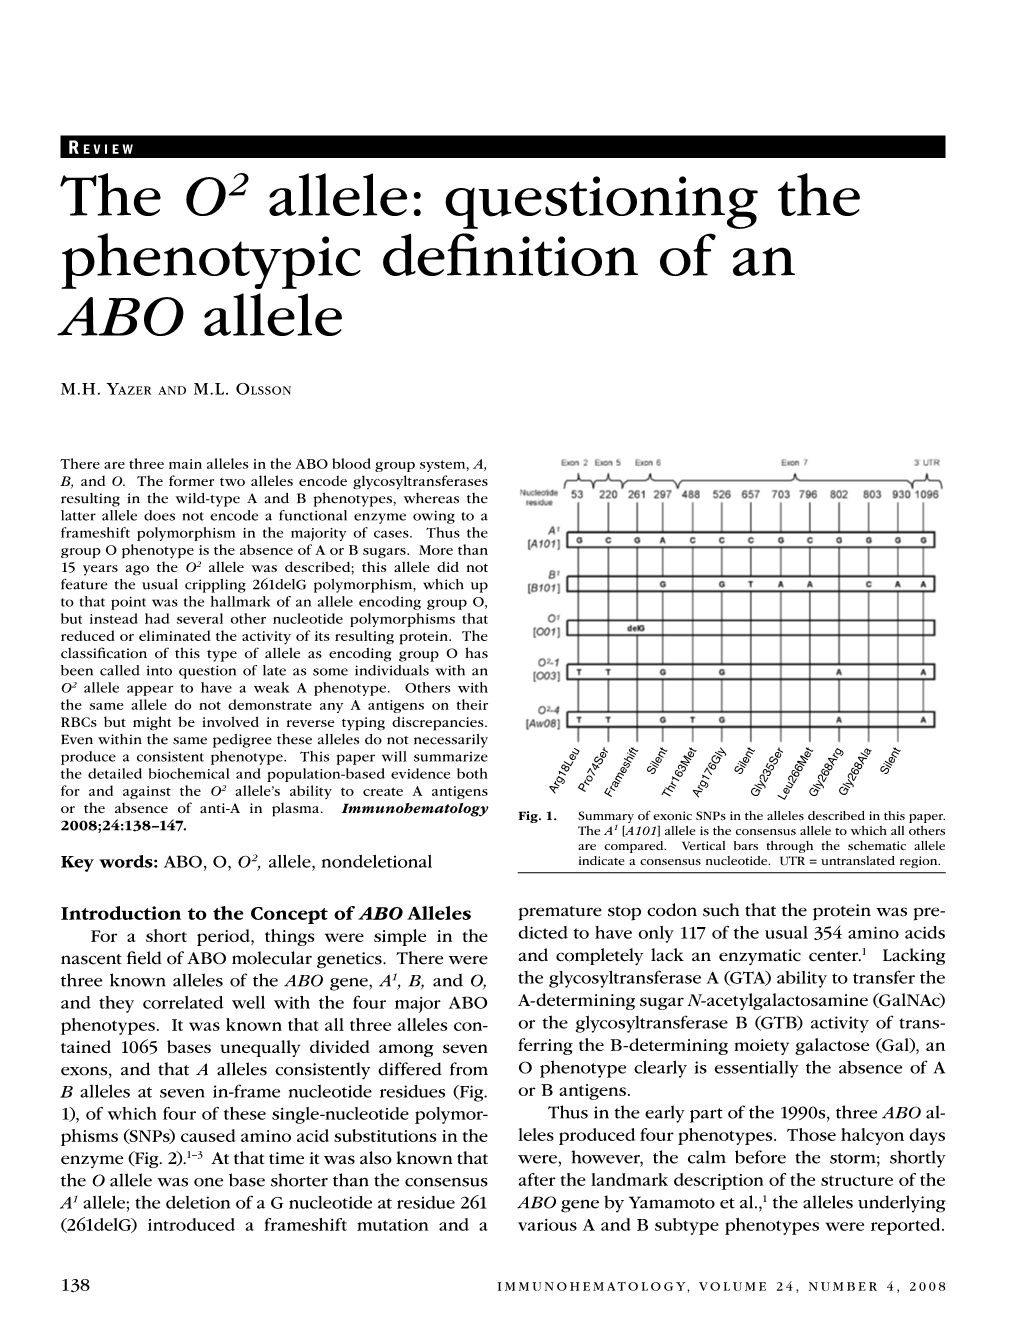 The O2 Allele: Questioning the Phenotypic Definition of an ABO Allele